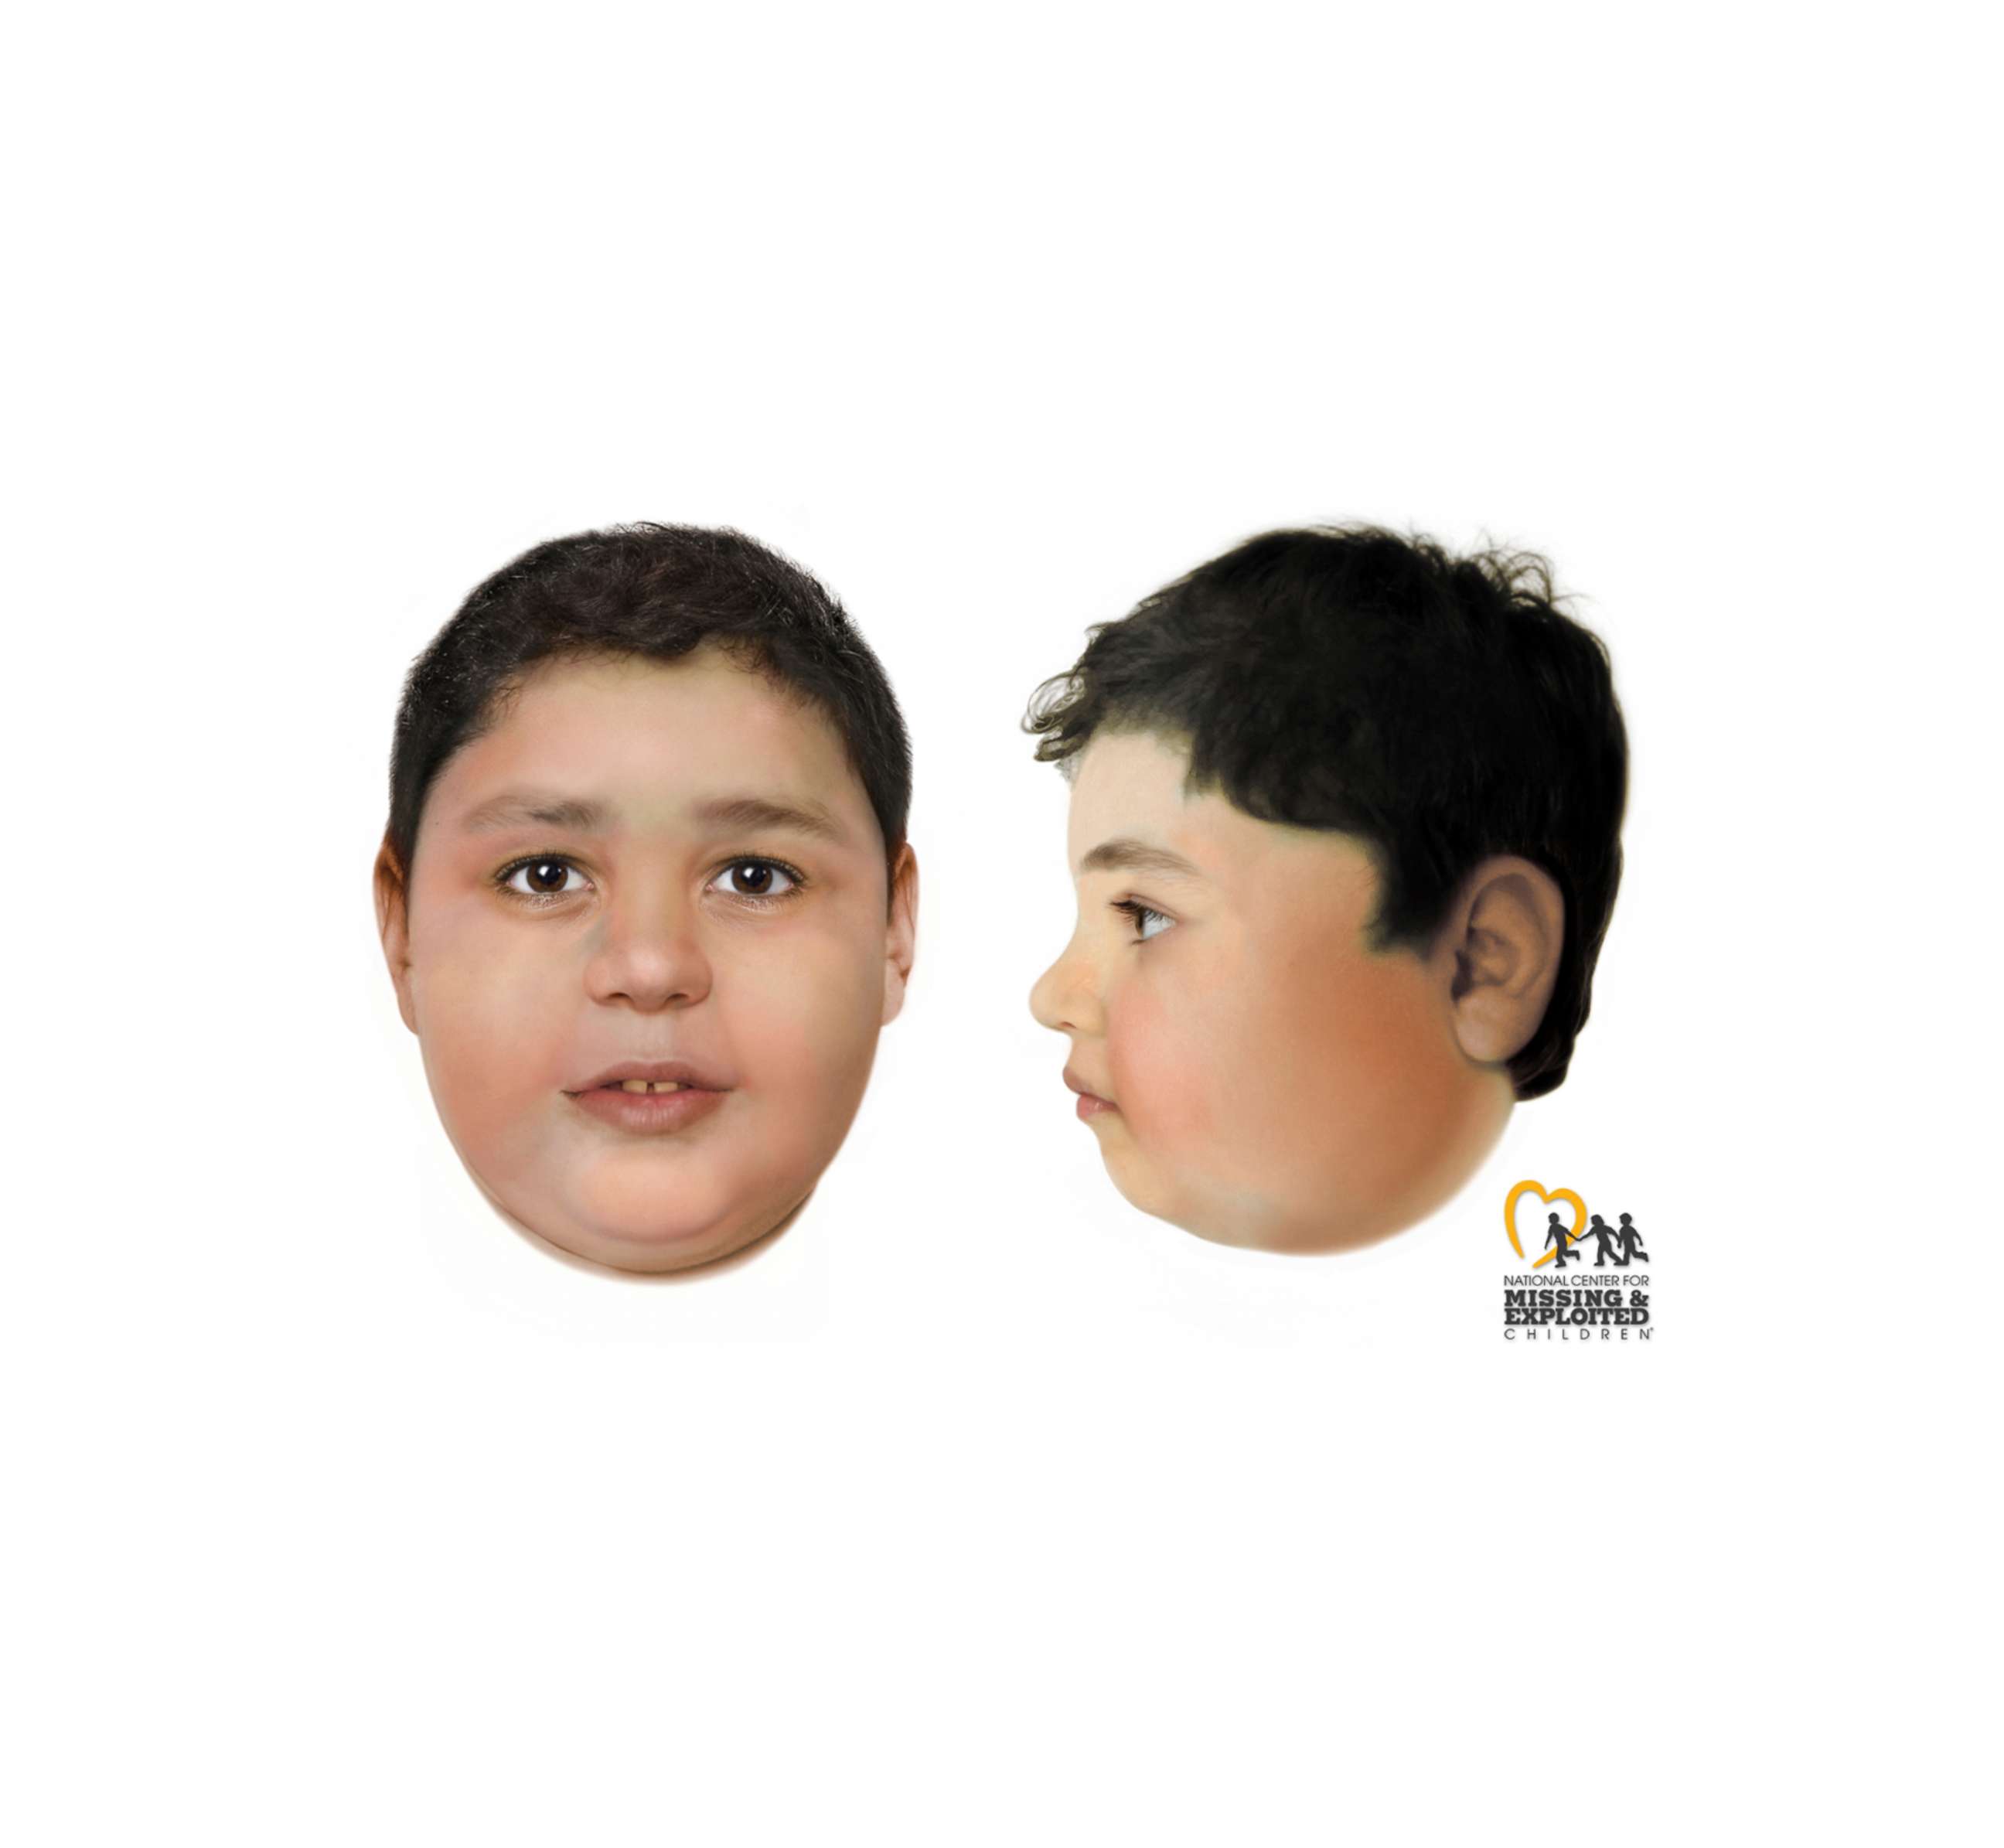 PHOTO: The Las Vegas Metropolitan Police Department has released digitally enhanced images developed by the NCMEC that depict an unidentified boy who was found dead on a hiking trail near Las Vegas on May 28, 2021.